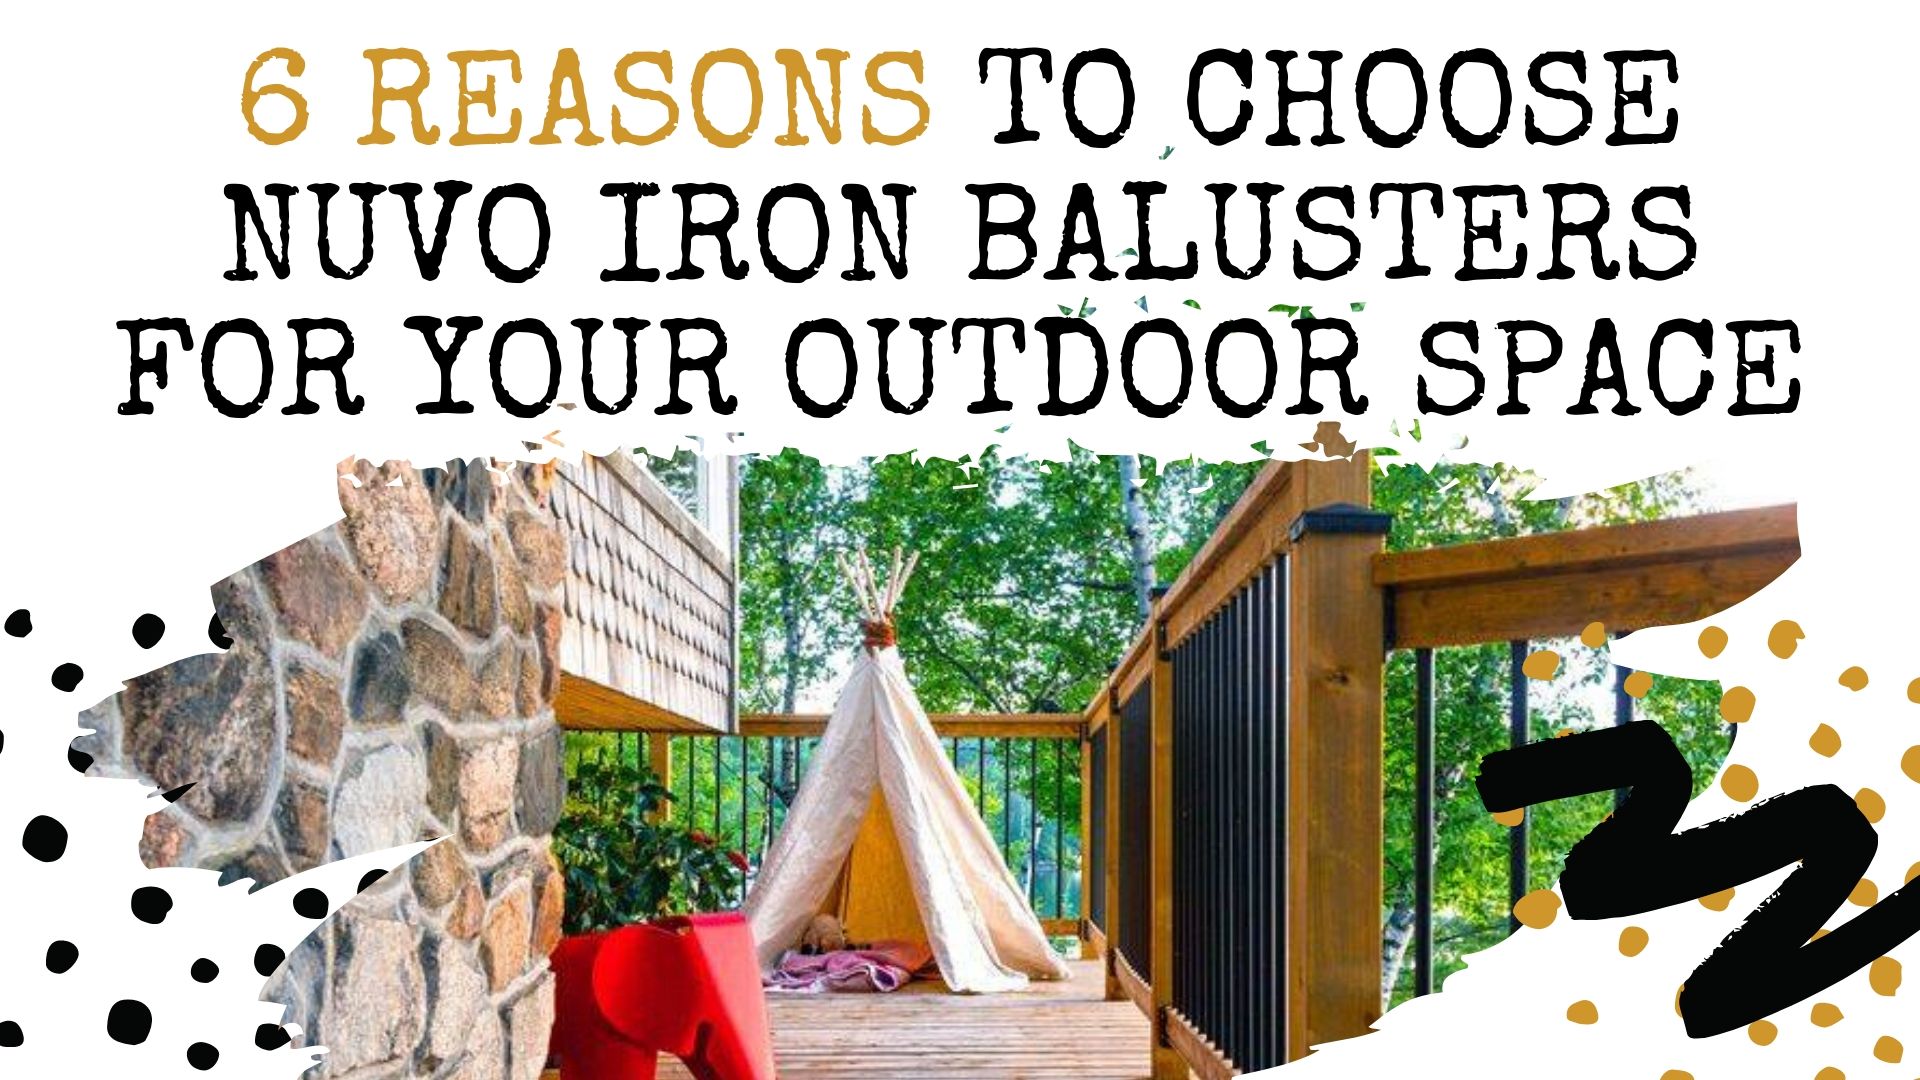 Nuvo Iron Balusters for your outdoor space.